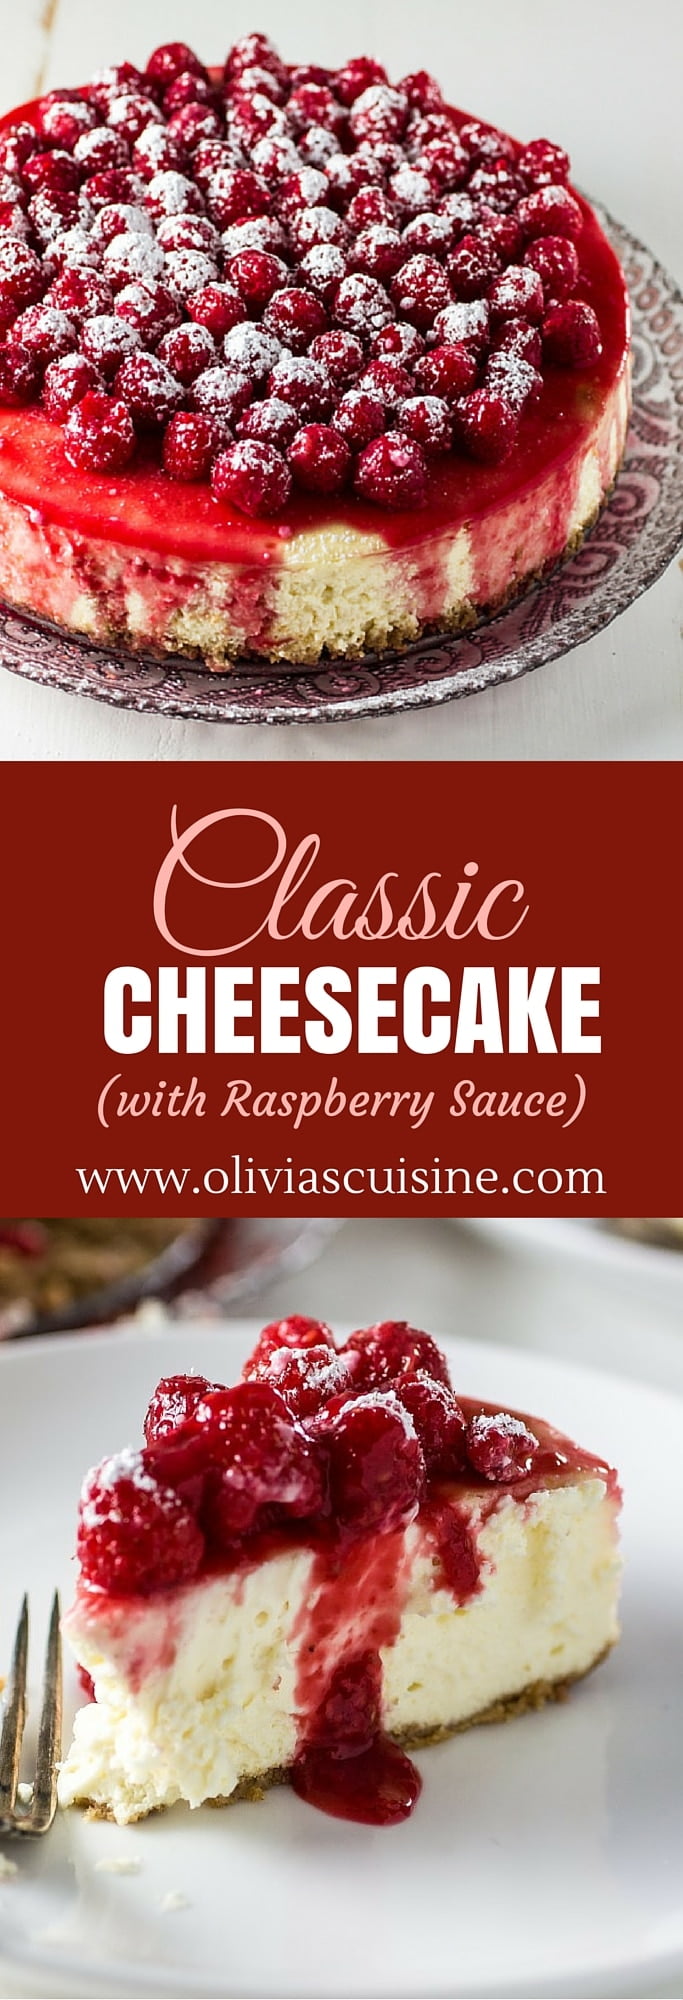 Classic Cheesecake with Raspberry Sauce | www.oliviascuisine.com | Few things in life are as good as a creamy and delicious cheesecake. This classic recipe is made even better with the addition of a tangy and sweet raspberry sauce.